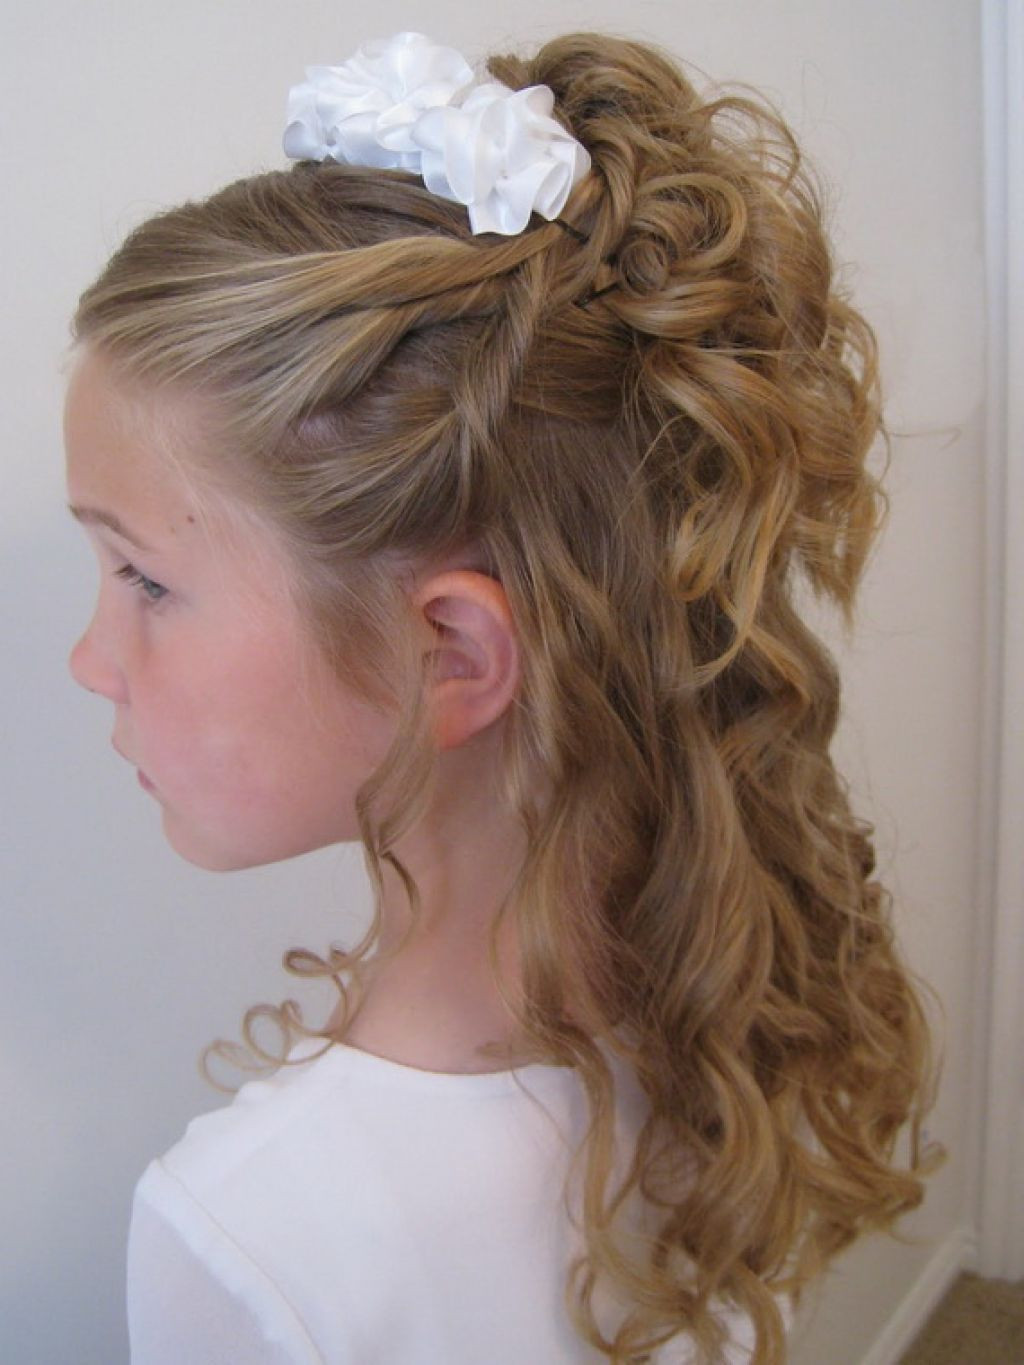 Hairstyles For Little Girls For Weddings
 20 Wedding Hairstyles For Kids Ideas wedding